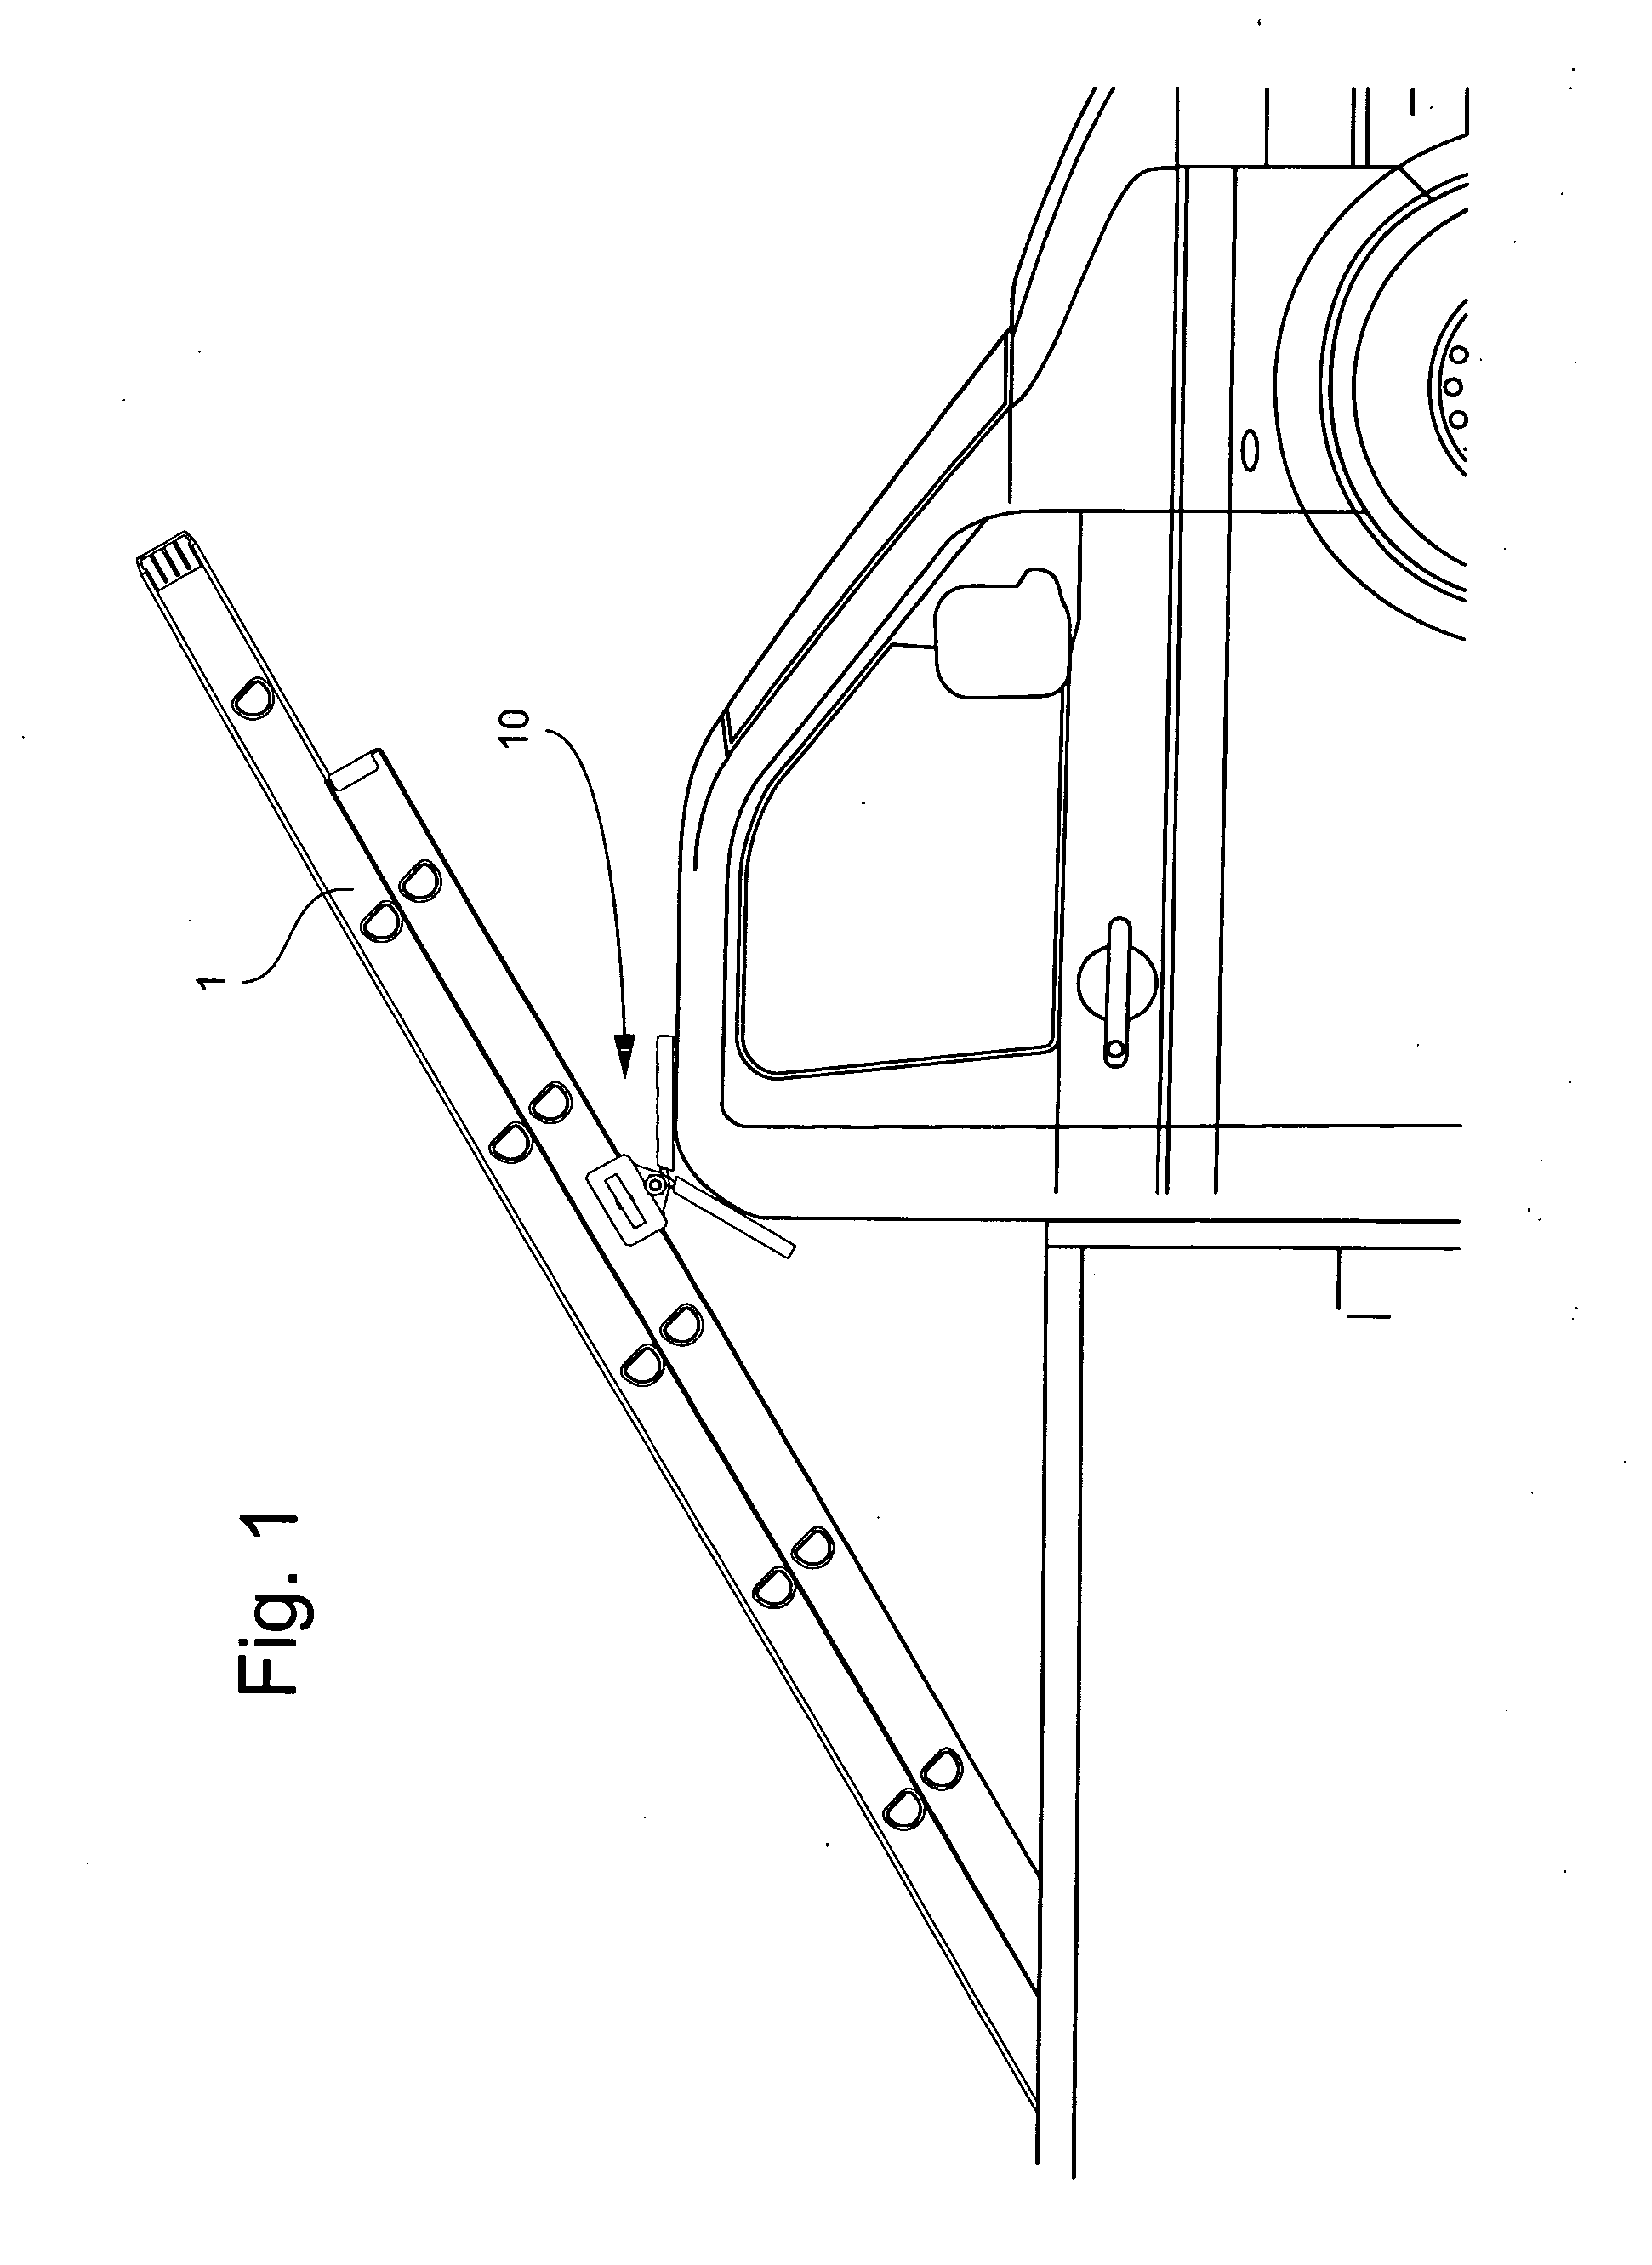 Device and method for transporting elongate objects using pick-up truck